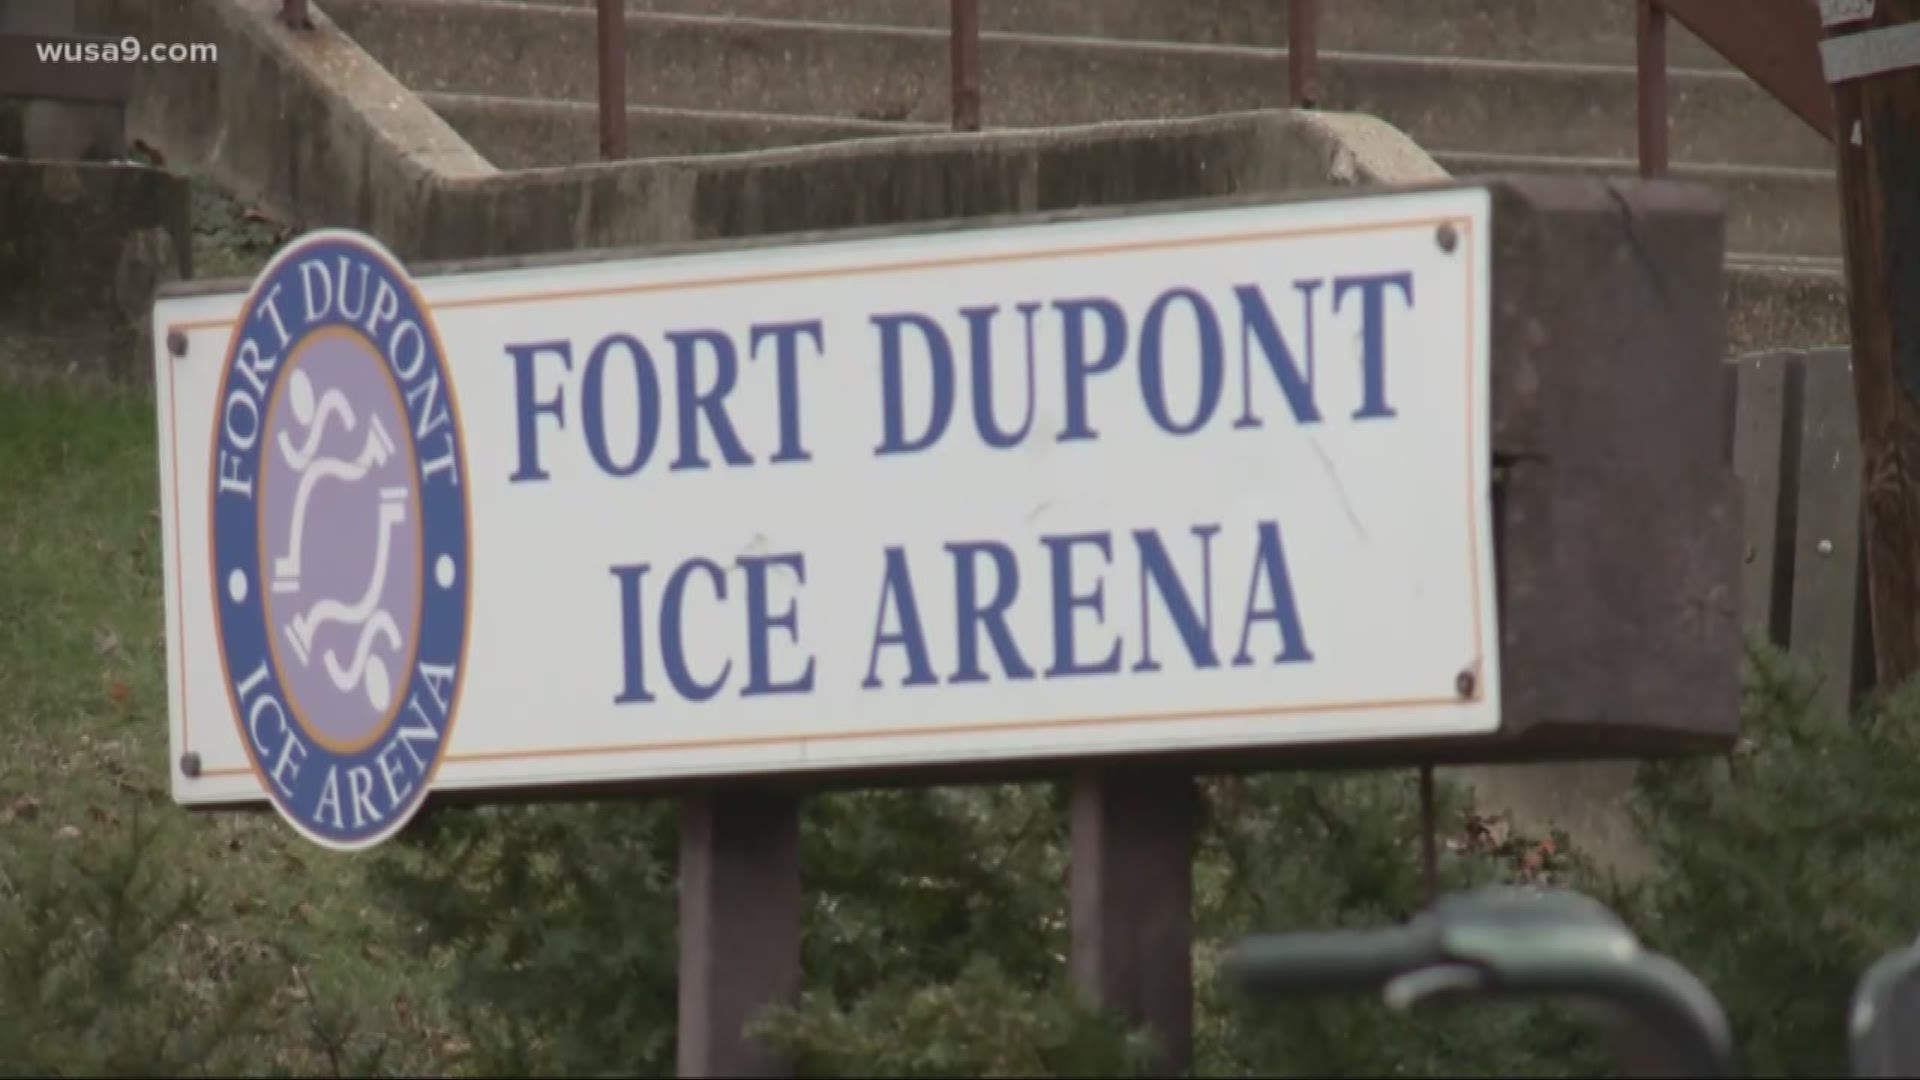 DC may be backing out of a deal to help fund a popular Southeast skating rink known for grooming Olympians. The Fort Dupont skating arena is where athletes like speed skater Mame Biney got her start.